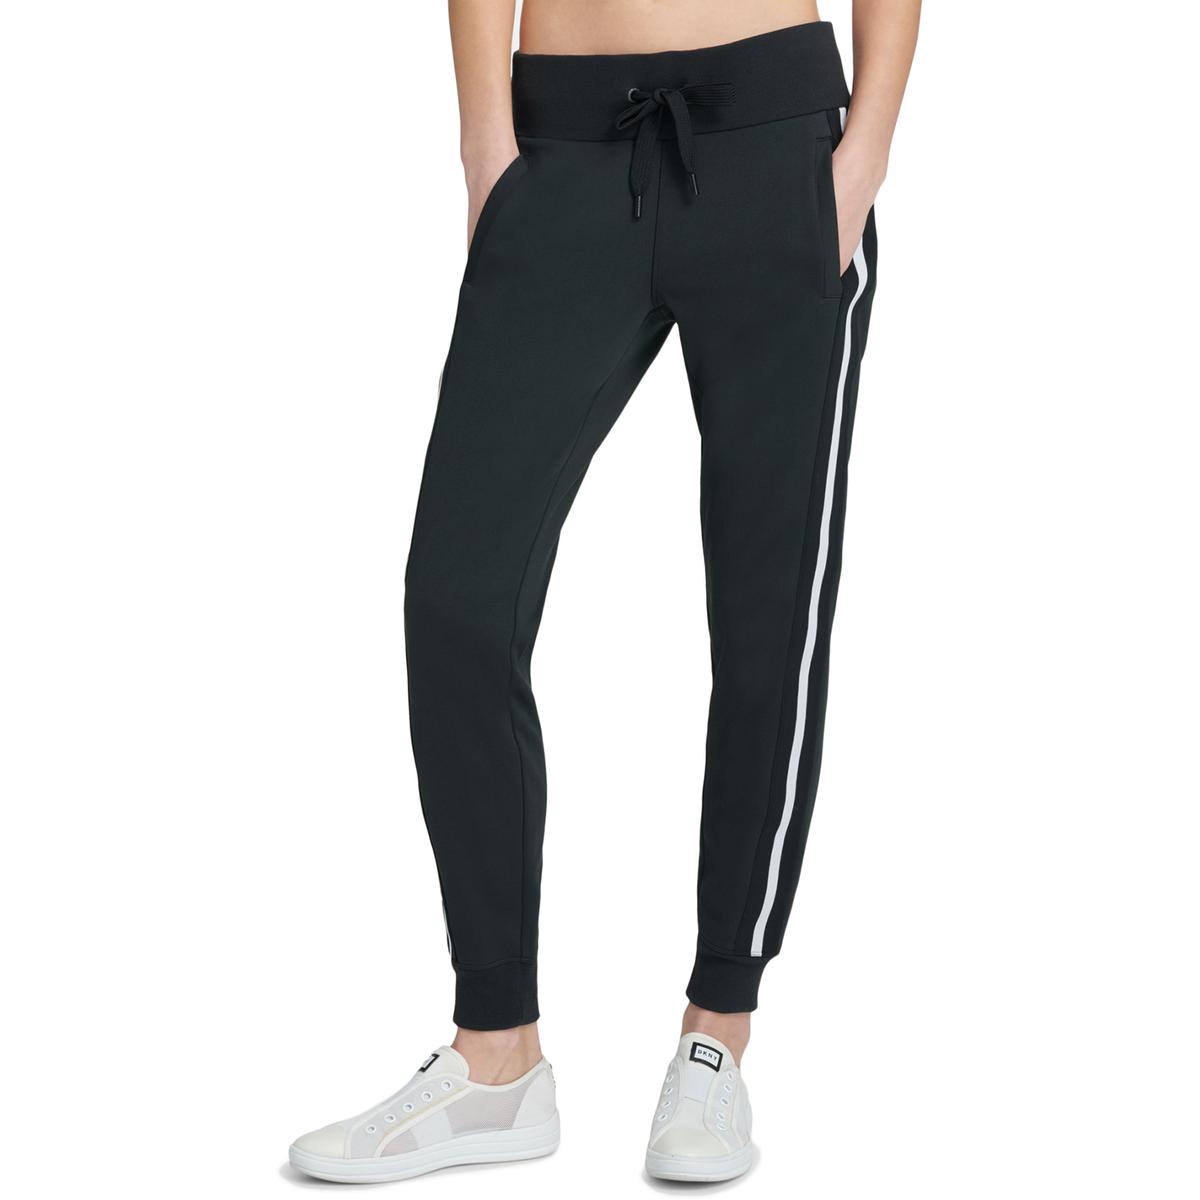 DKNY Sport Womens Black Relaxed Striped Pull On Jogger Pants L BHFO ...